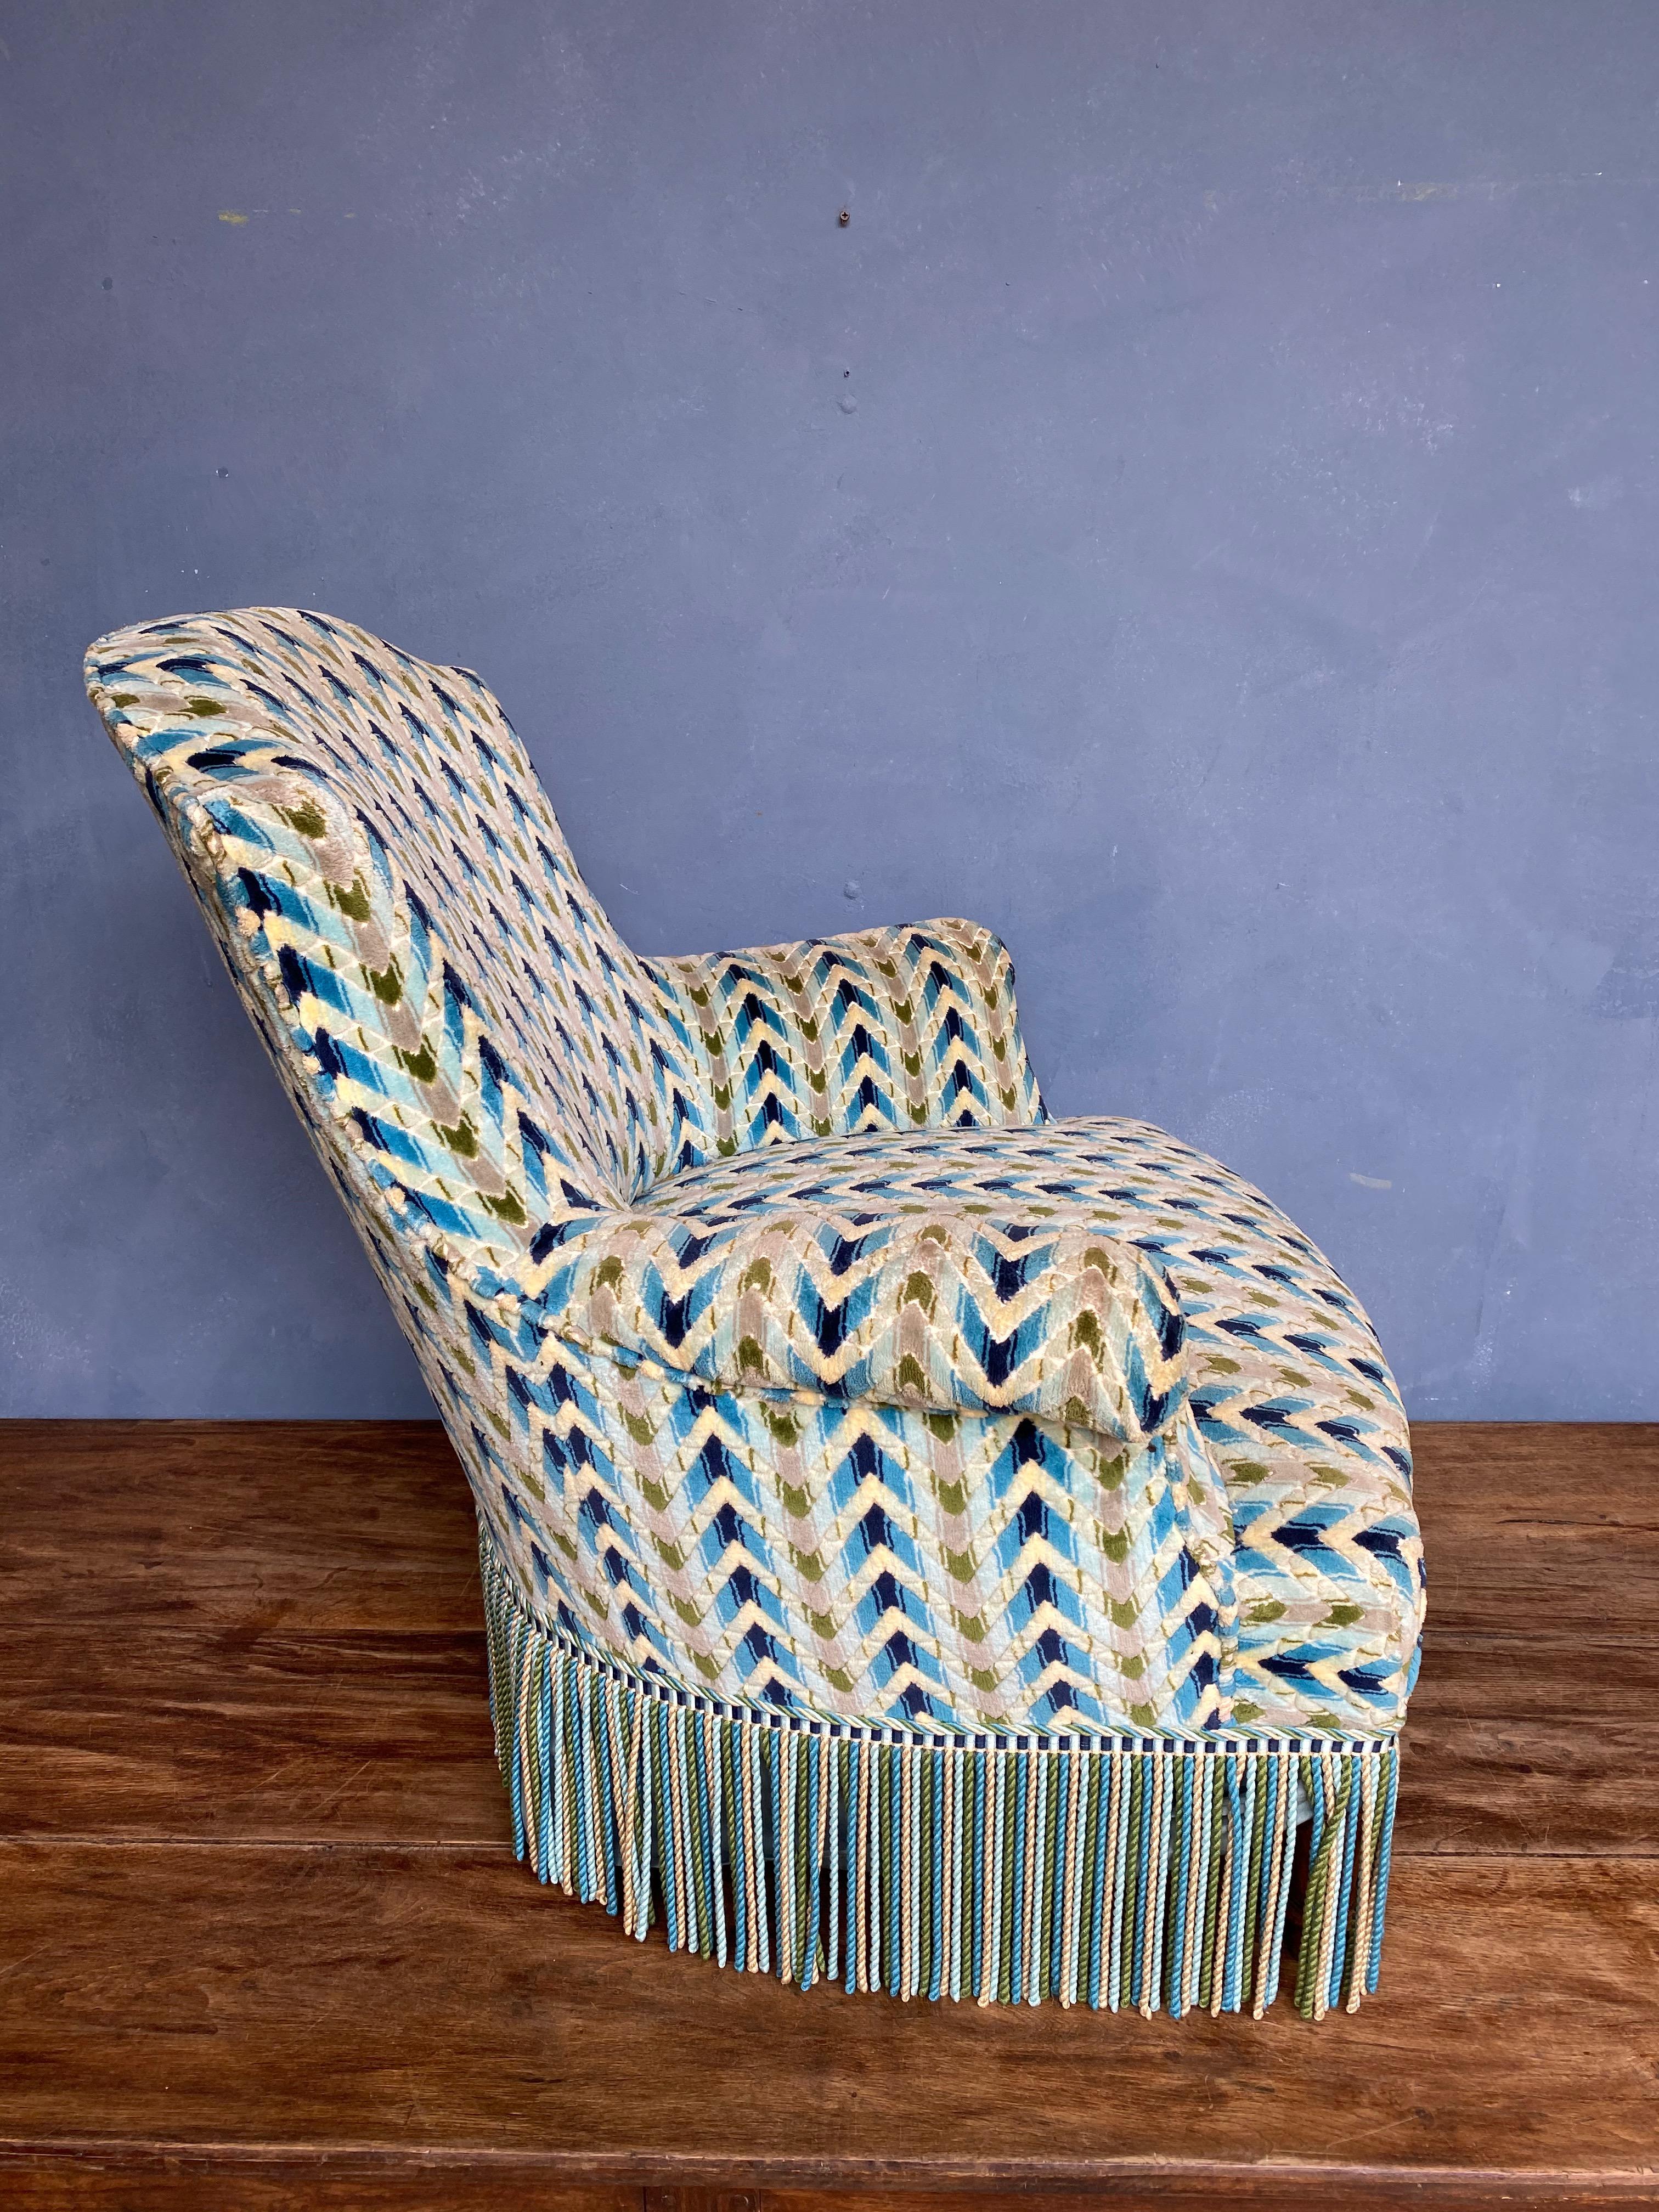 19th Century French Napoleon III Armchair in Geometric Patterned Velvet